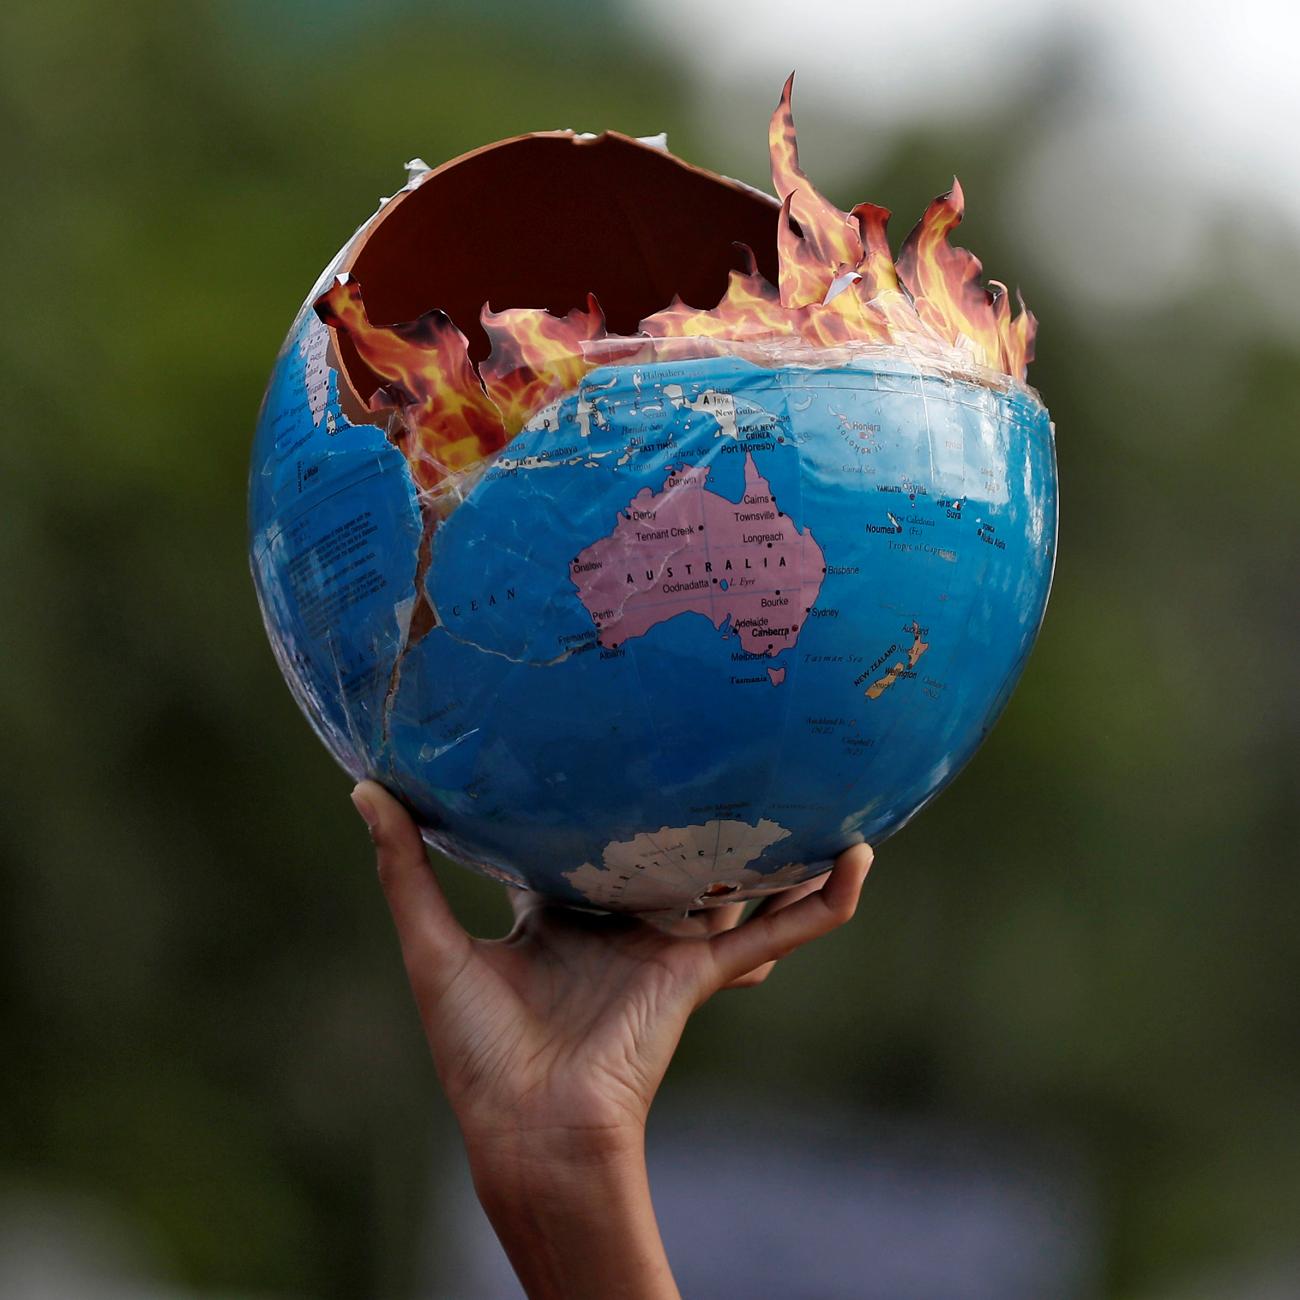 A protestor participating in a "Fridays for Future" march calling for urgent measures to combat climate change holds a globe designed to look like it is on fire, in Mumbai, India, on September 27, 2019. 